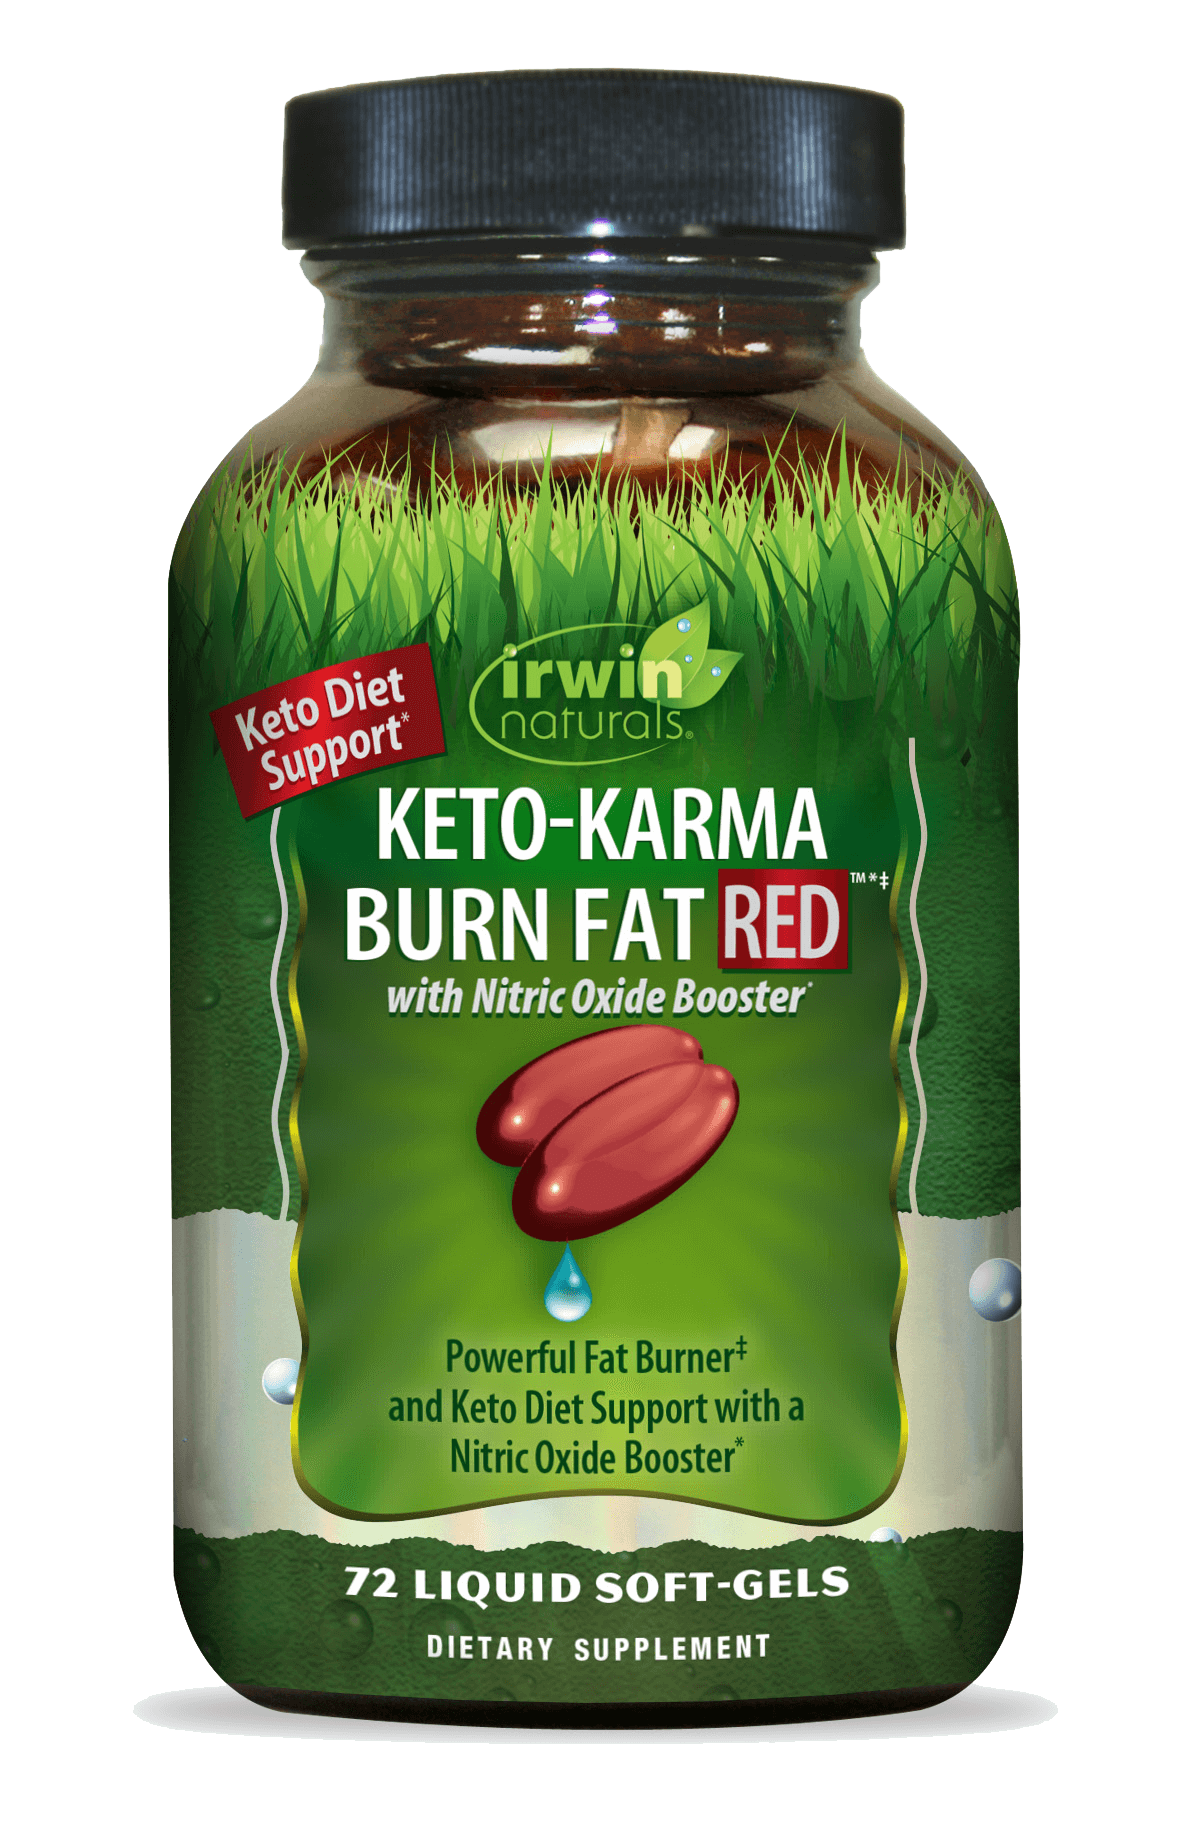 Keto Karma Burn Fat Red with Nitric Oxide Booster by Irwin Naturals